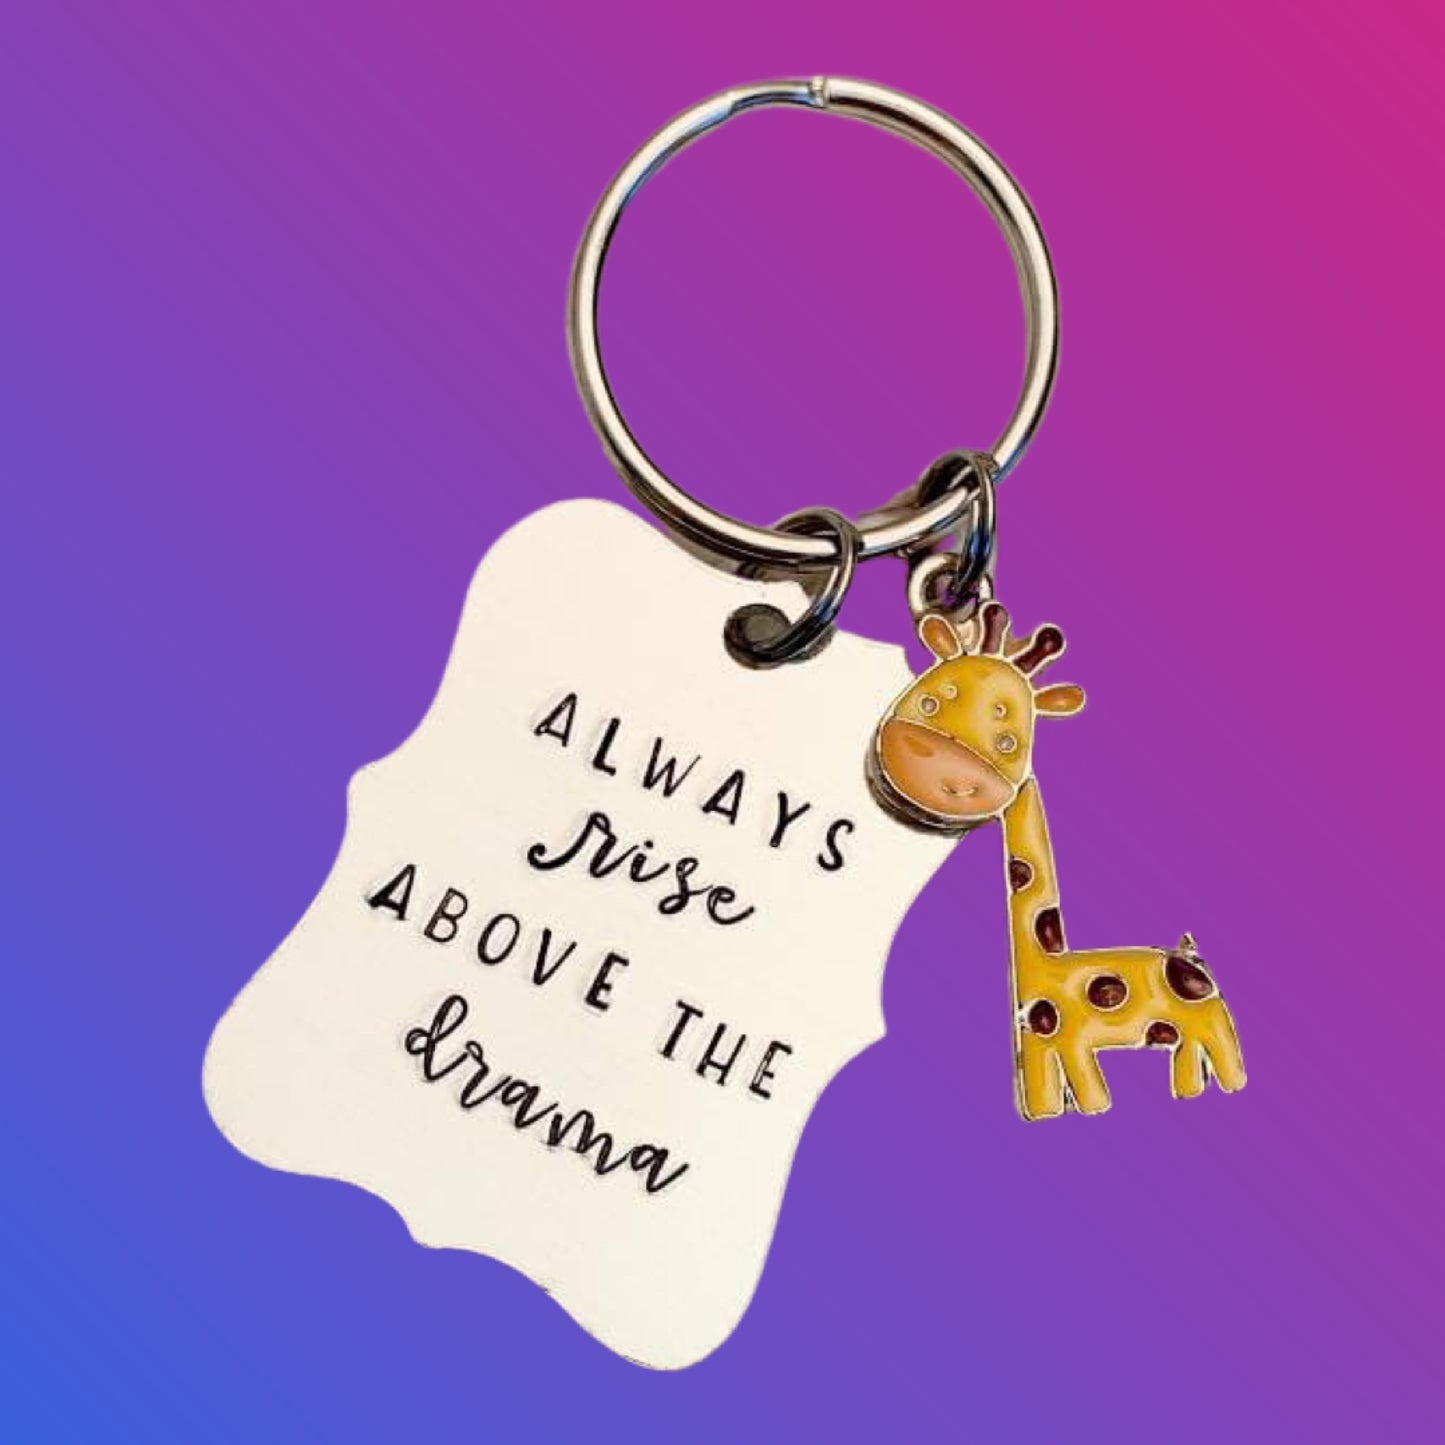 Always rise above the drama | Key Chain